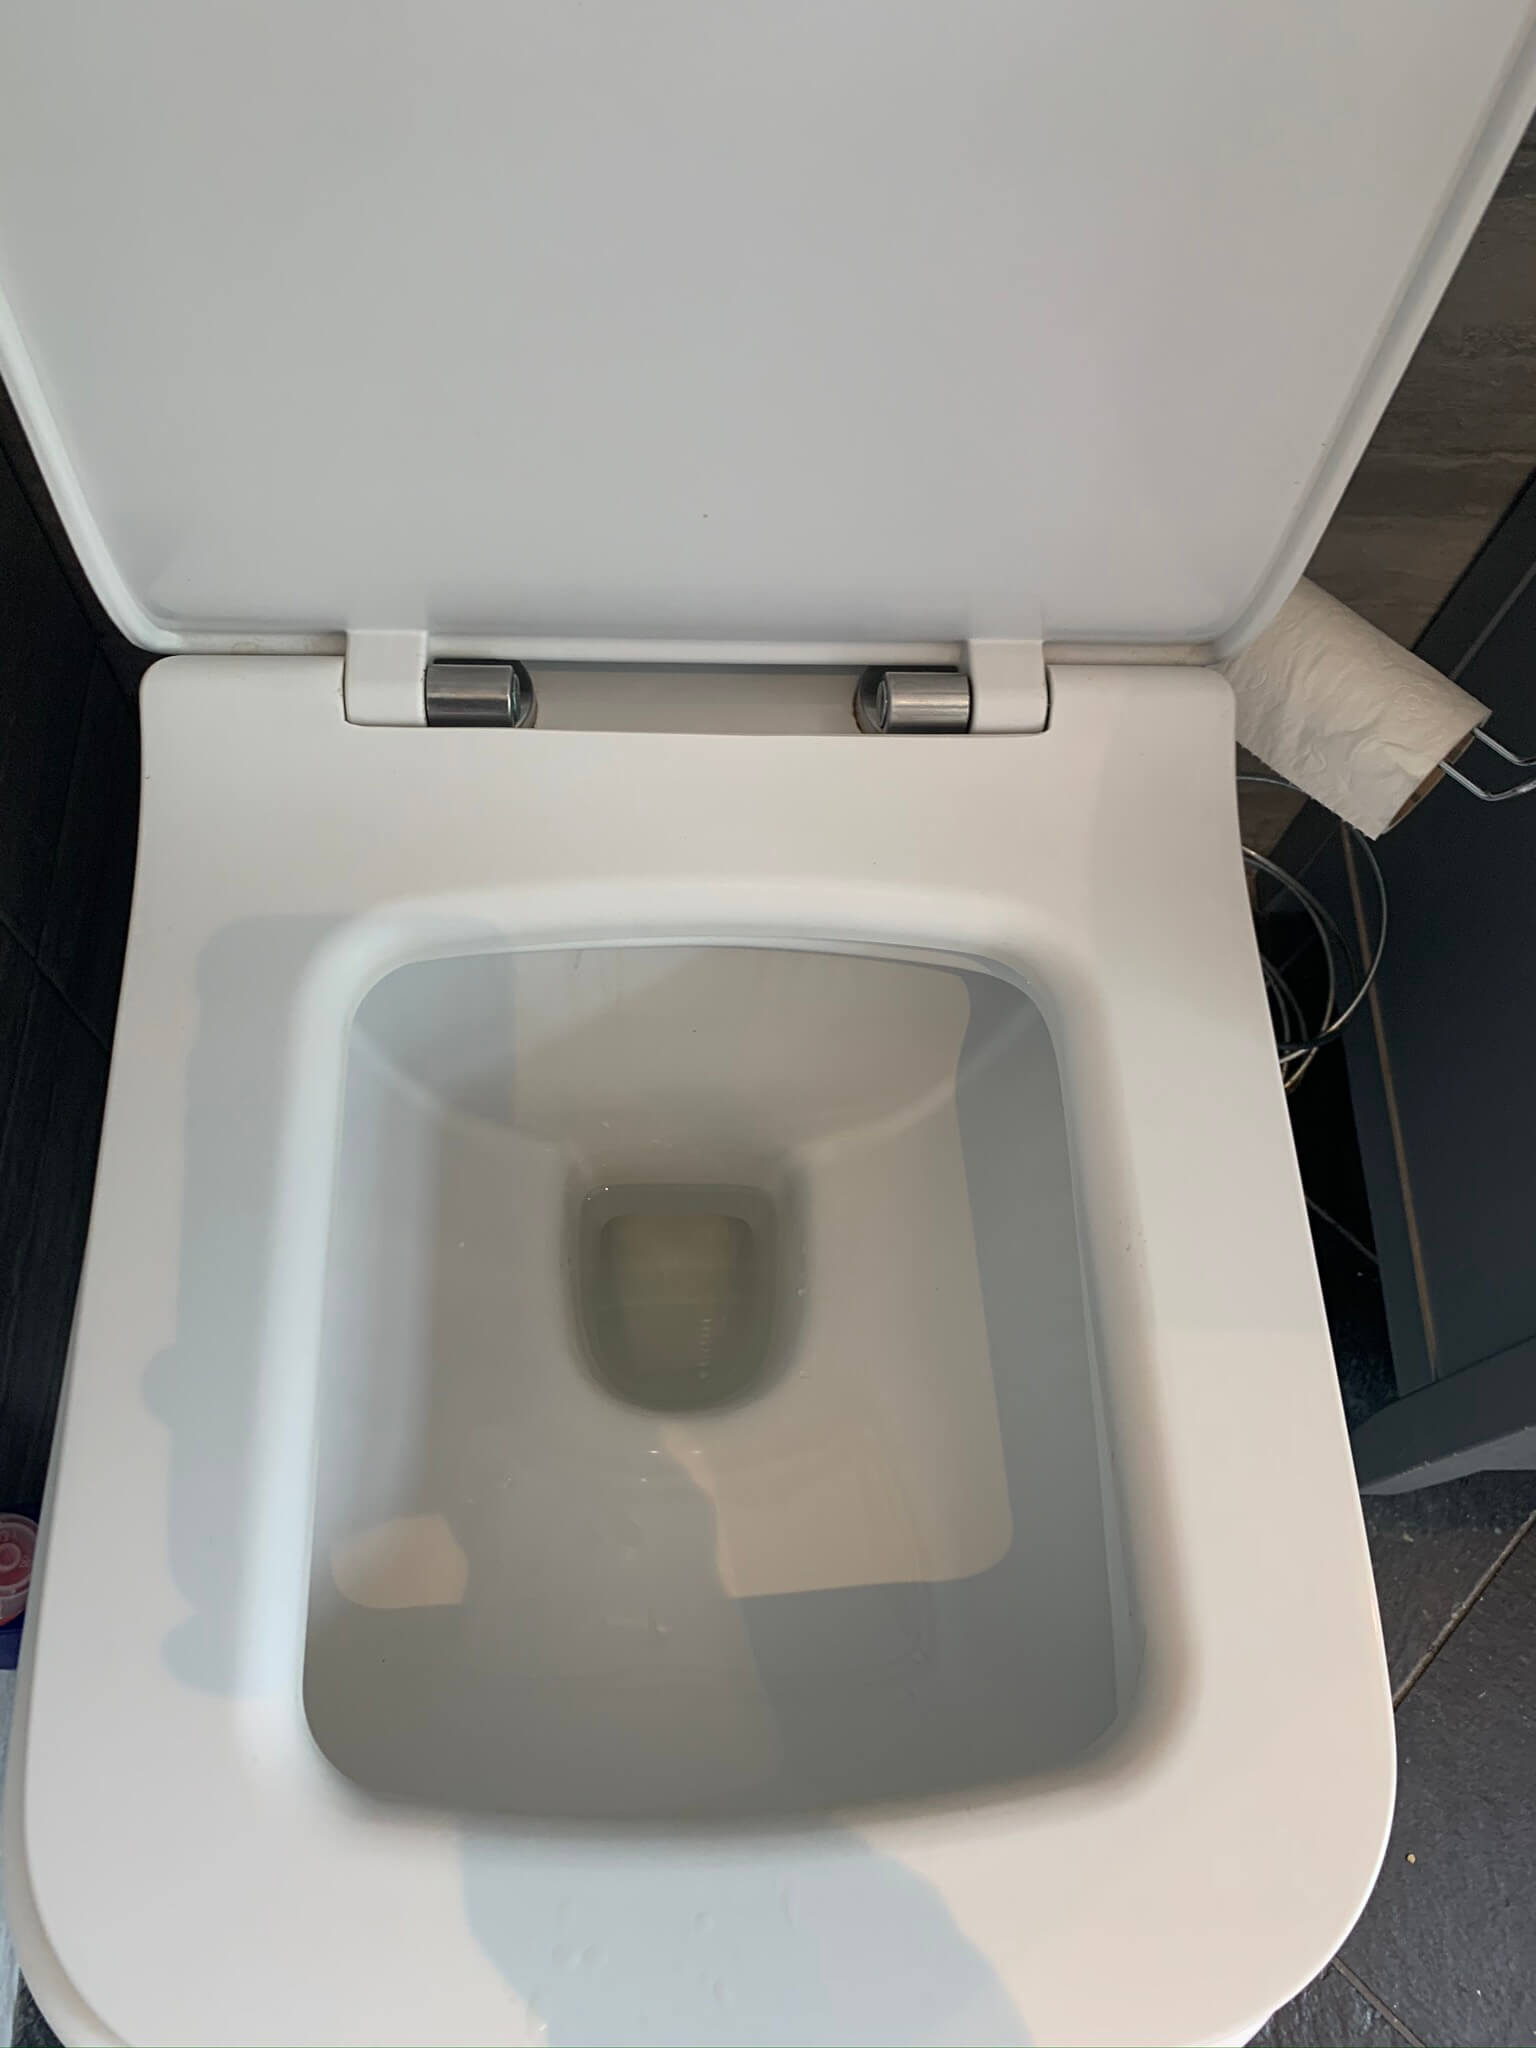 clean toilet before moving clean